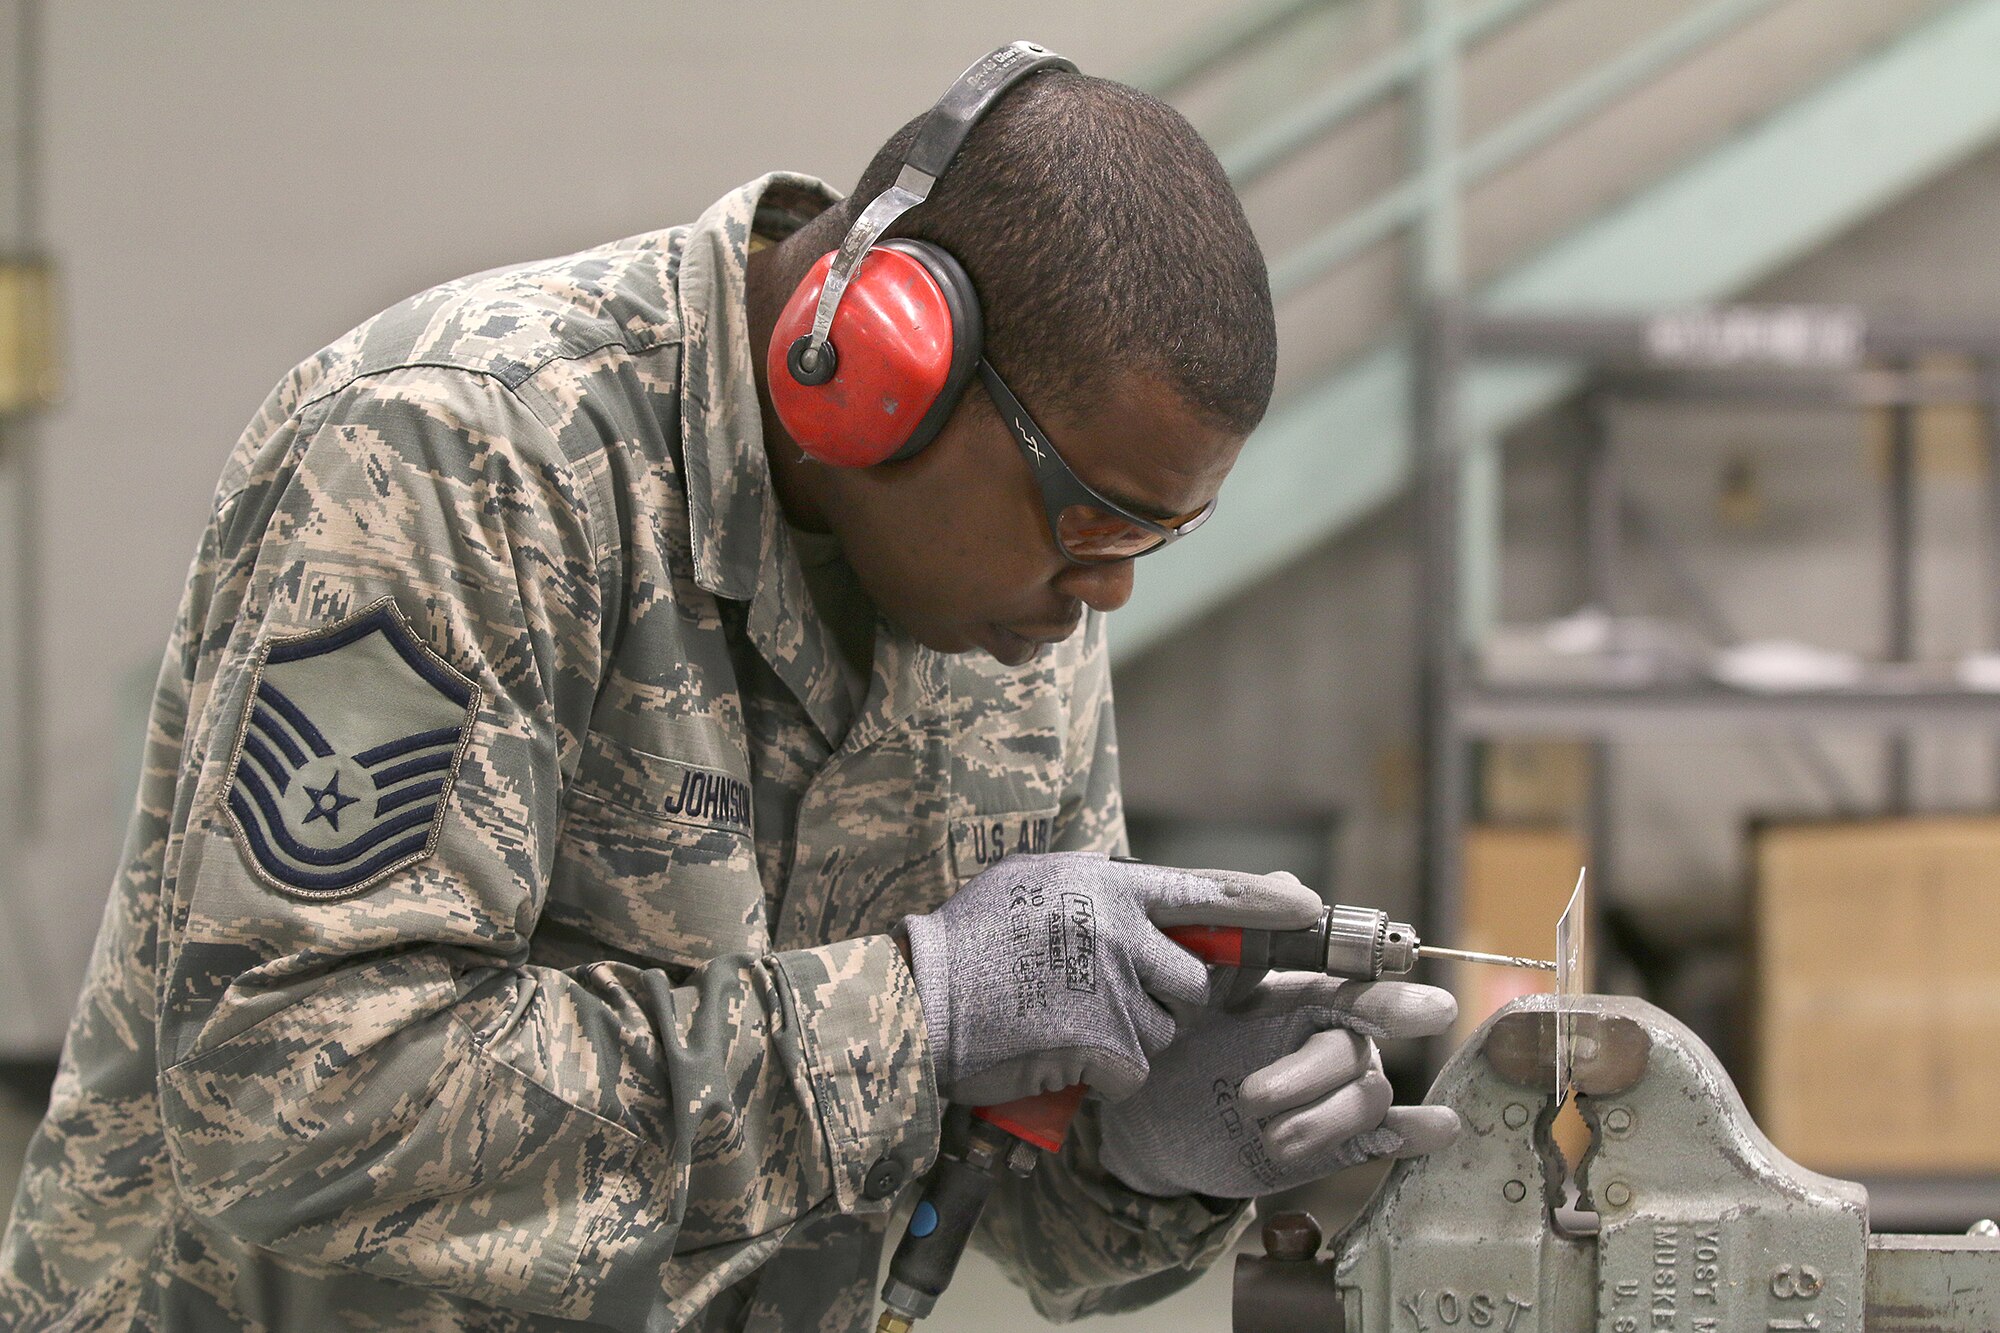 WRIGHT-PATTERSON AIR FORCE BASE, Ohio – Master Sgt. Quinton Johnson, 445th Maintenance Squadron aircraft structural maintenance supervisor, drills metal for aircraft repair. The fabrication shop works with various materials such as sheet metal, paint, tubing, cables and other materials used for repairs on the C-17 Globemaster III.  (U.S. Air Force photo/Tech. Sgt. Patrick O’Reilly)